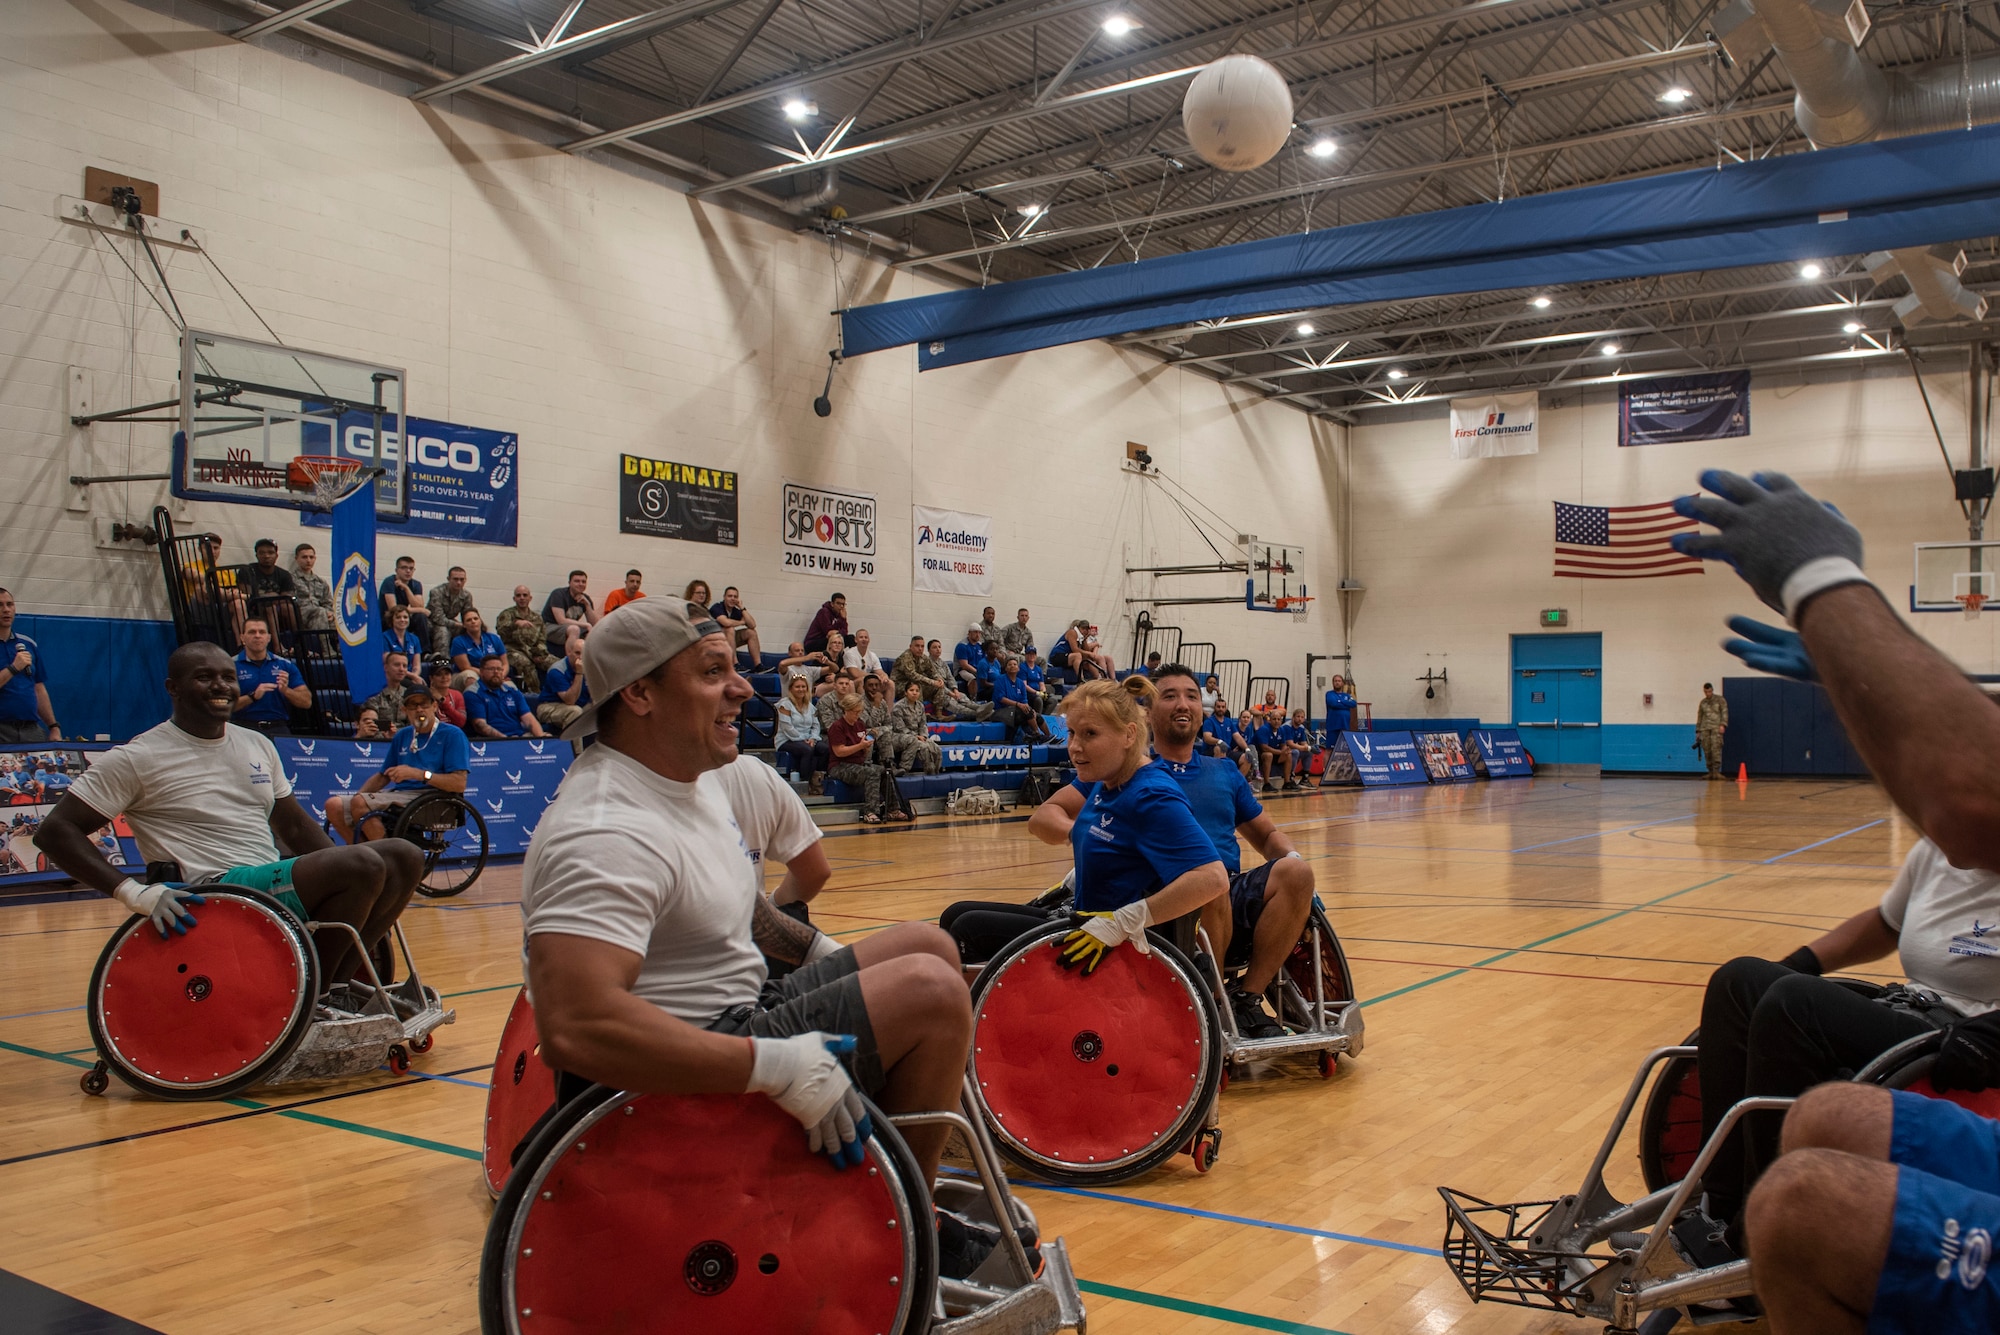 Air Force Wounded Warriors play a game of wheelchair rugby against volunteers, during the AFW2 CARE event Aug. 23, 2019 at Scott Air Force Base, Ill. Throughout the week, program participants and volunteers were given time to learn the rules of the game, practice and get comfortable with racing up and down the court in wheelchairs. (U.S. Air Force photo by Senior Airman Daniel Garcia)